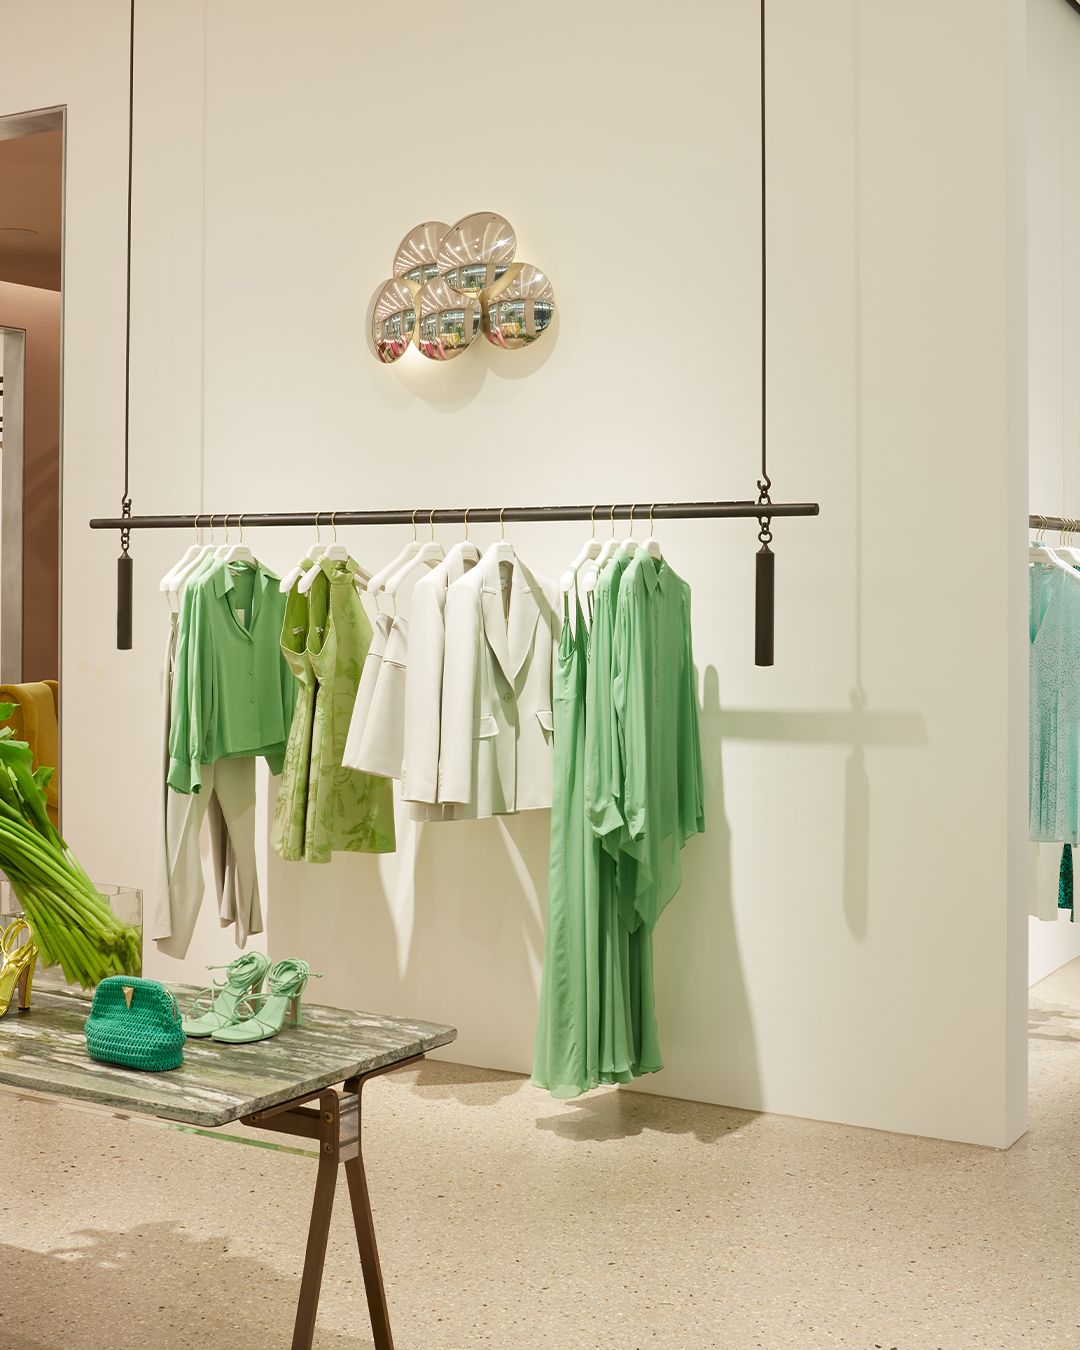 Interior of women's fashion boutique with clothing rack featuring green and white clothing